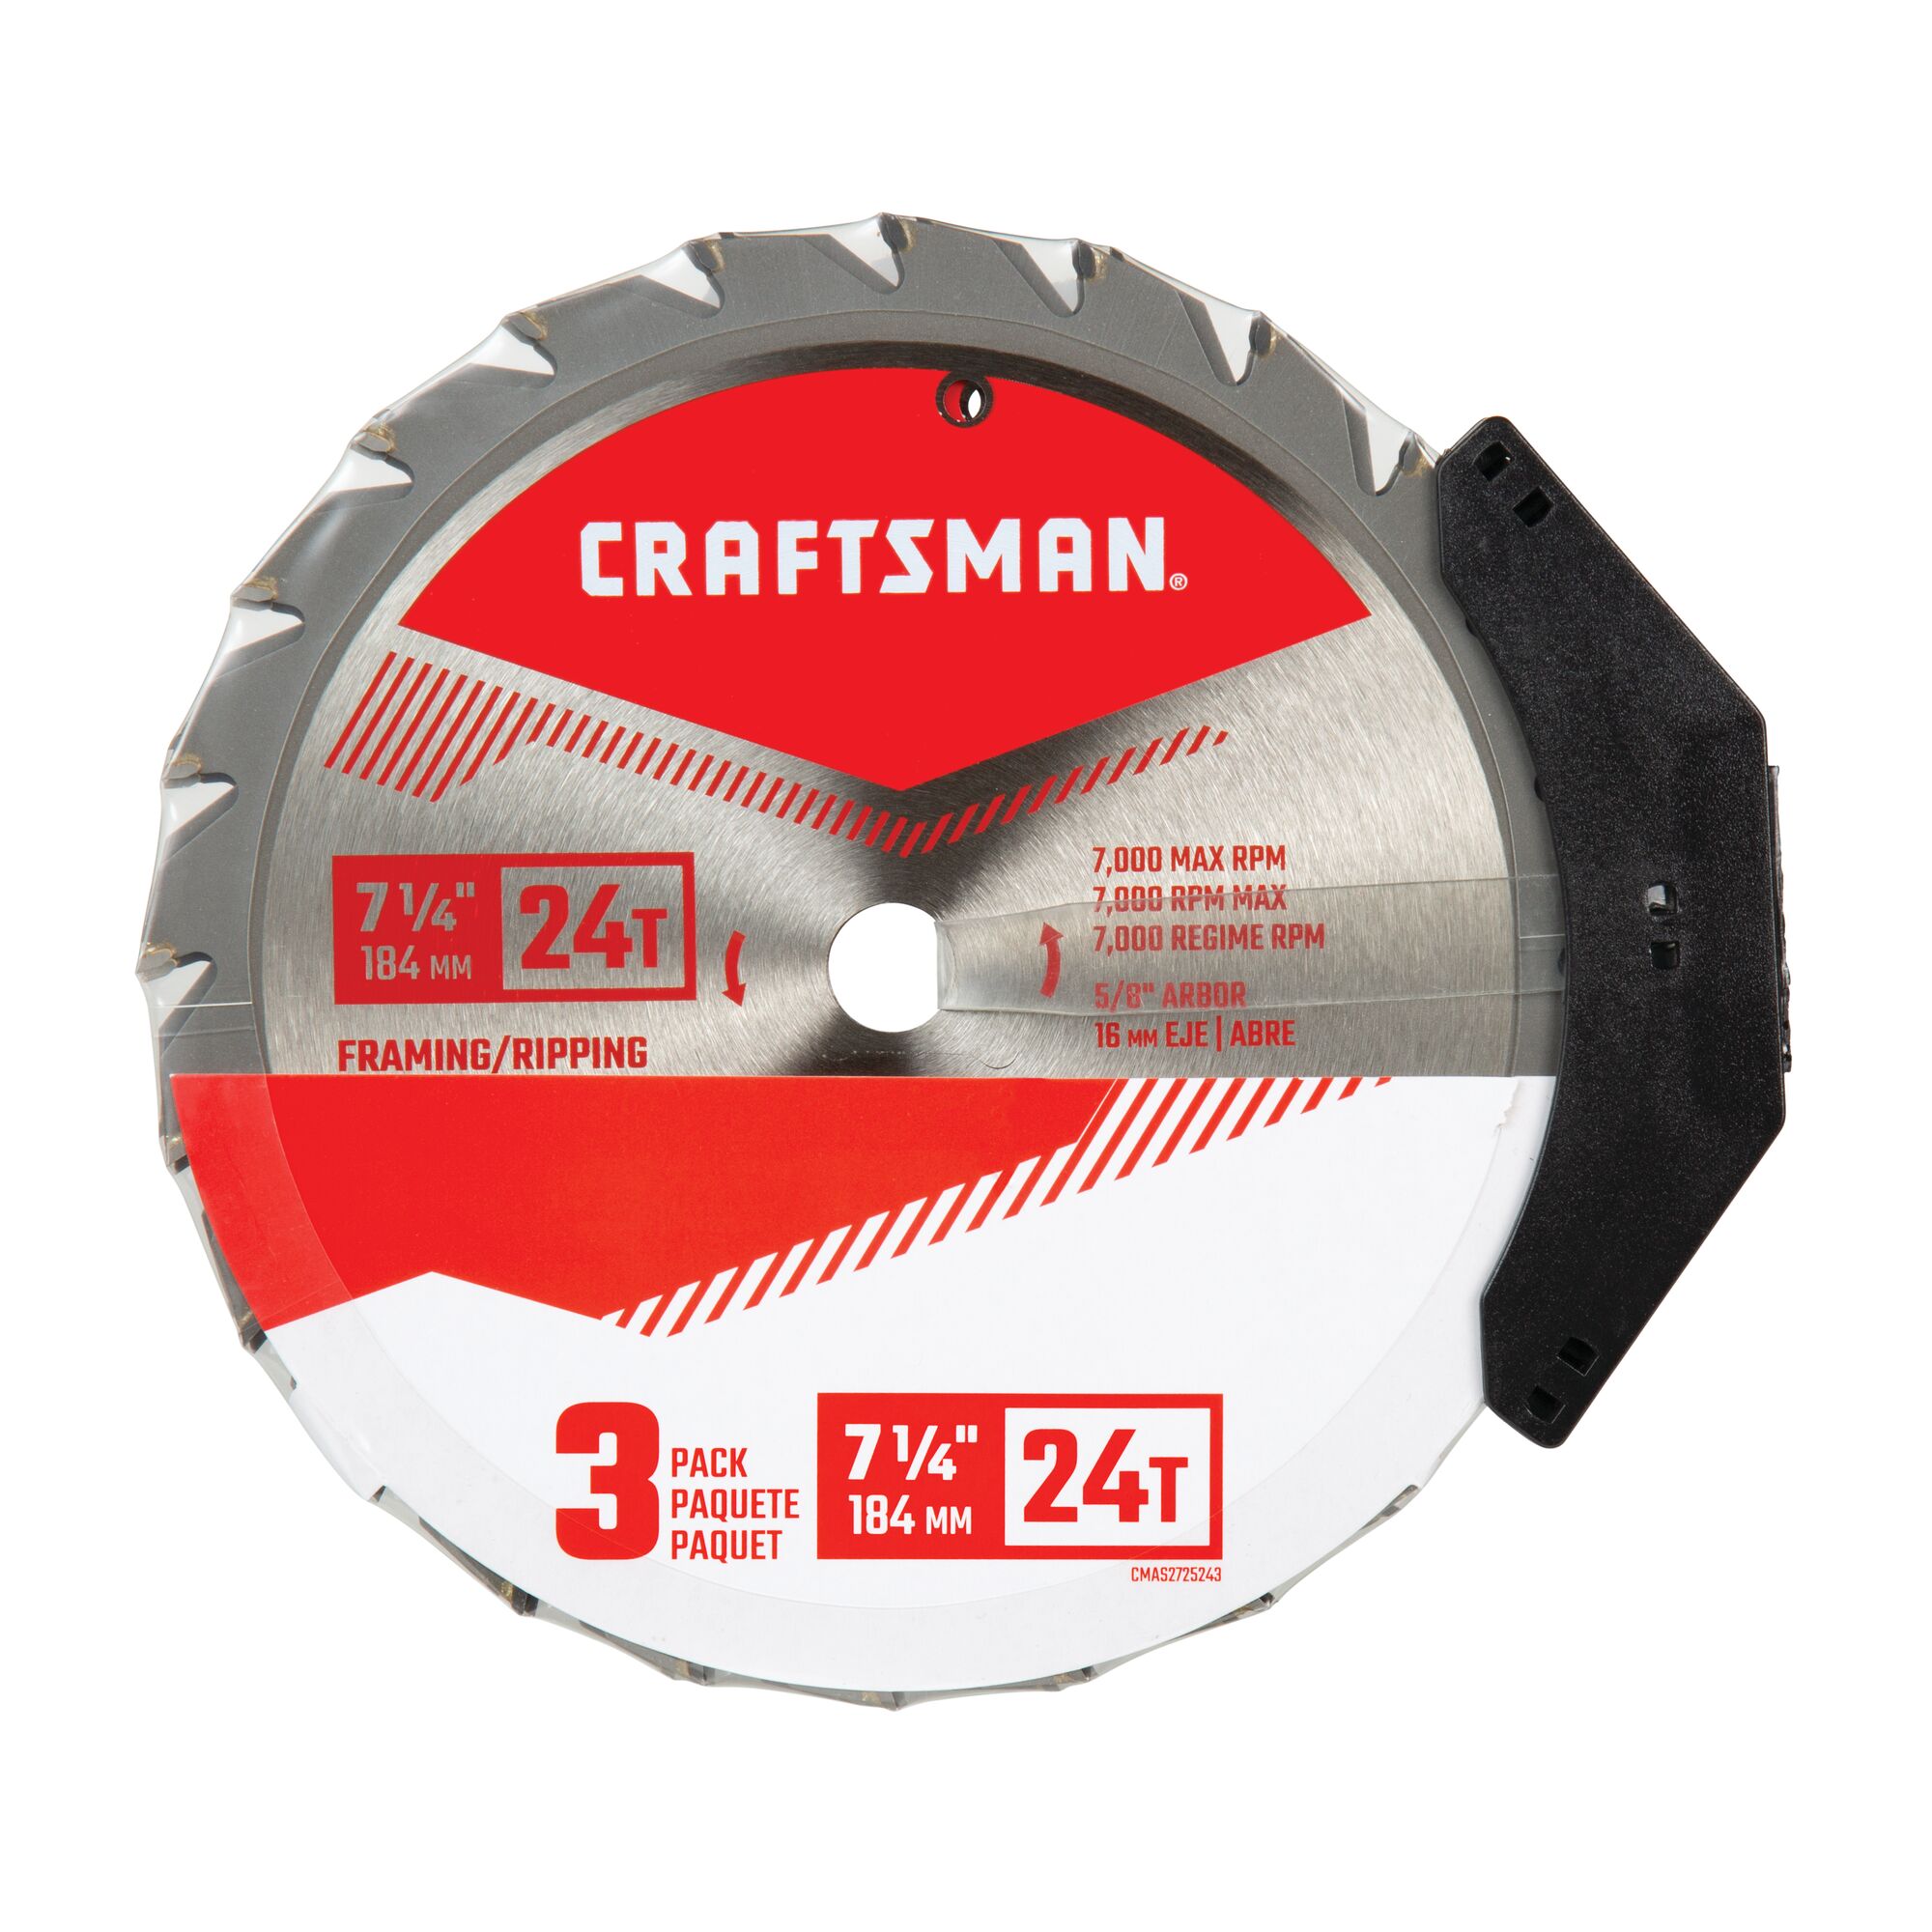 3 pack 7 and a quarter inch 24 tooth framing ripping saw blade in plastic packaging.